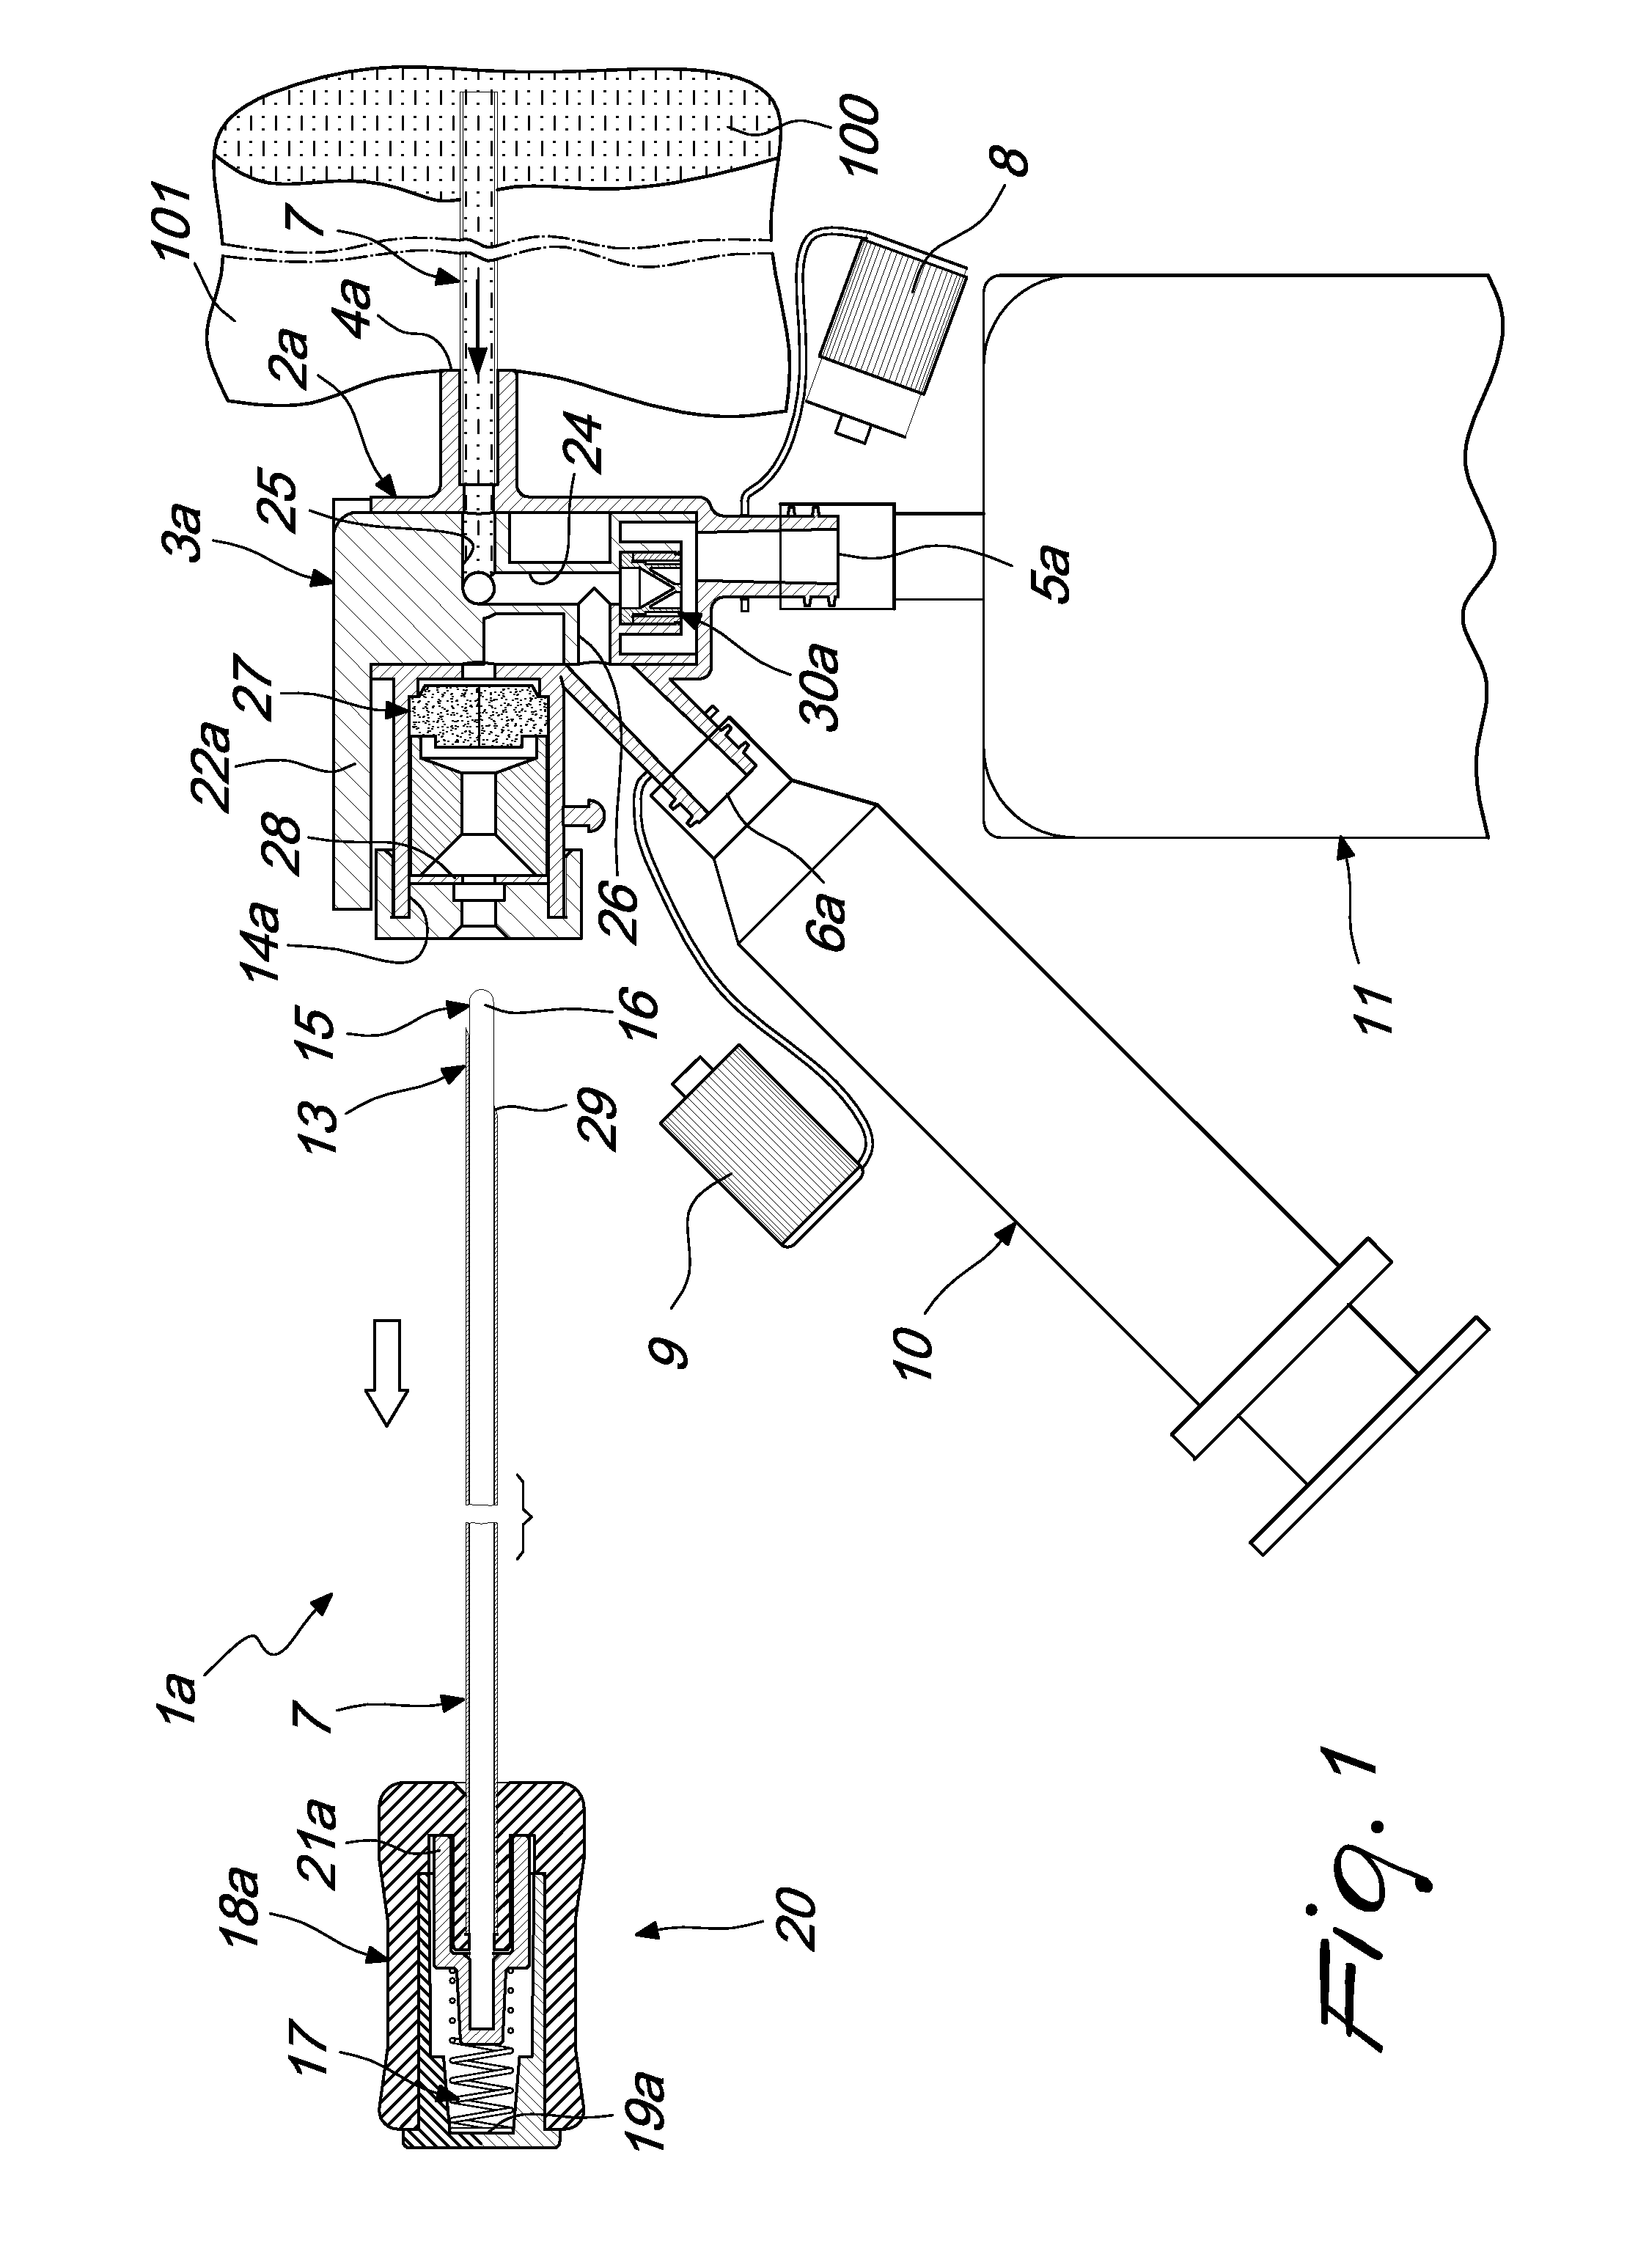 Medical device for applying catheters, particularly for thoracentesis procedures